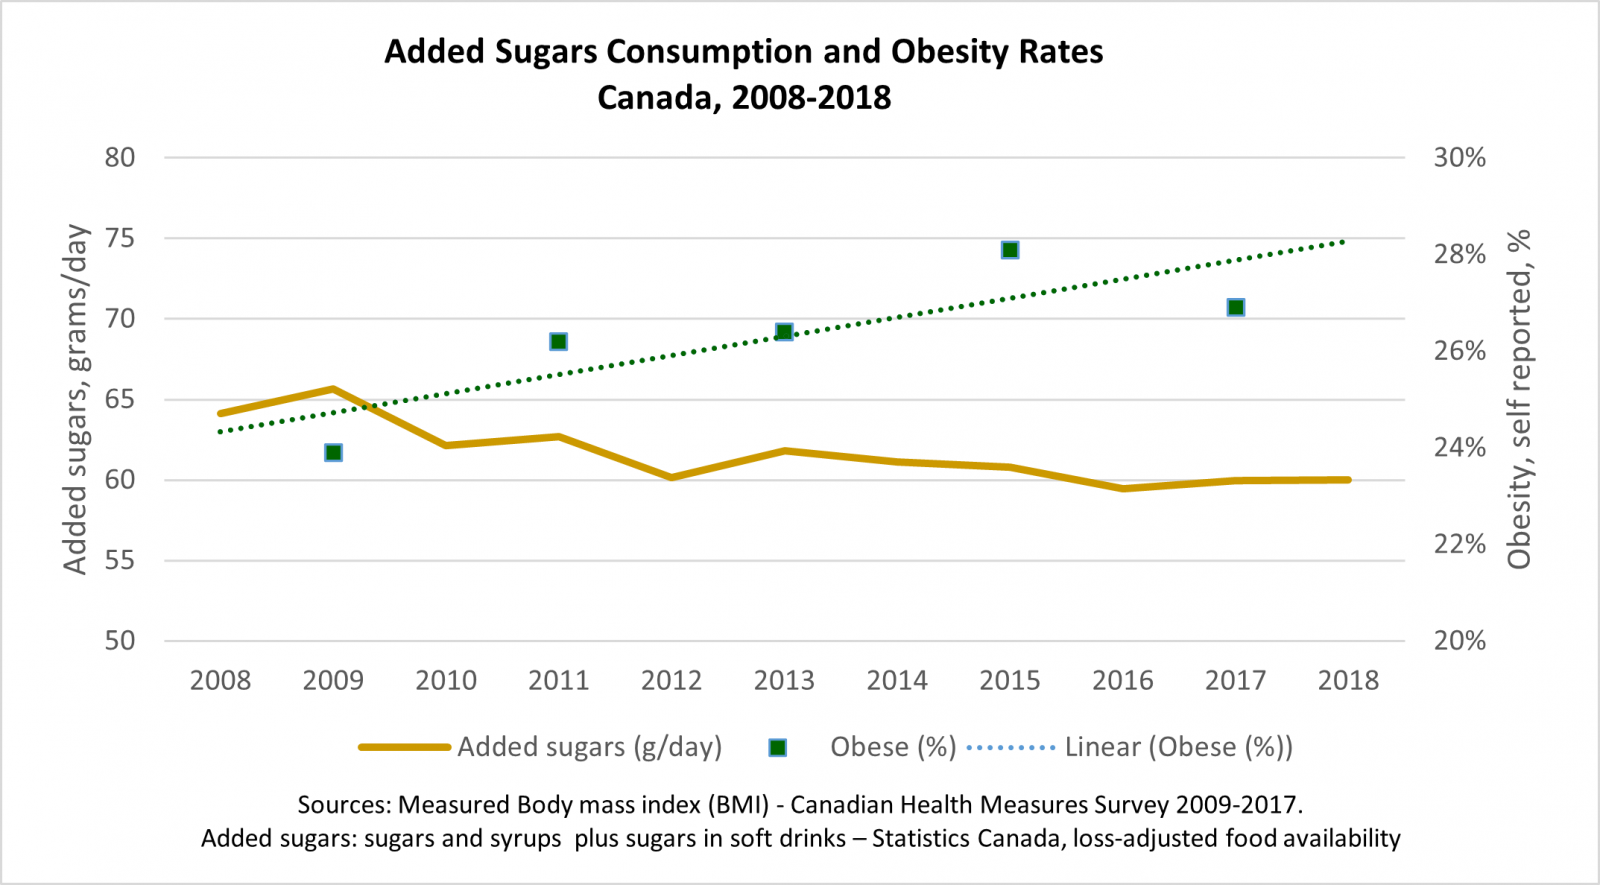 Sugar consumption and obesity